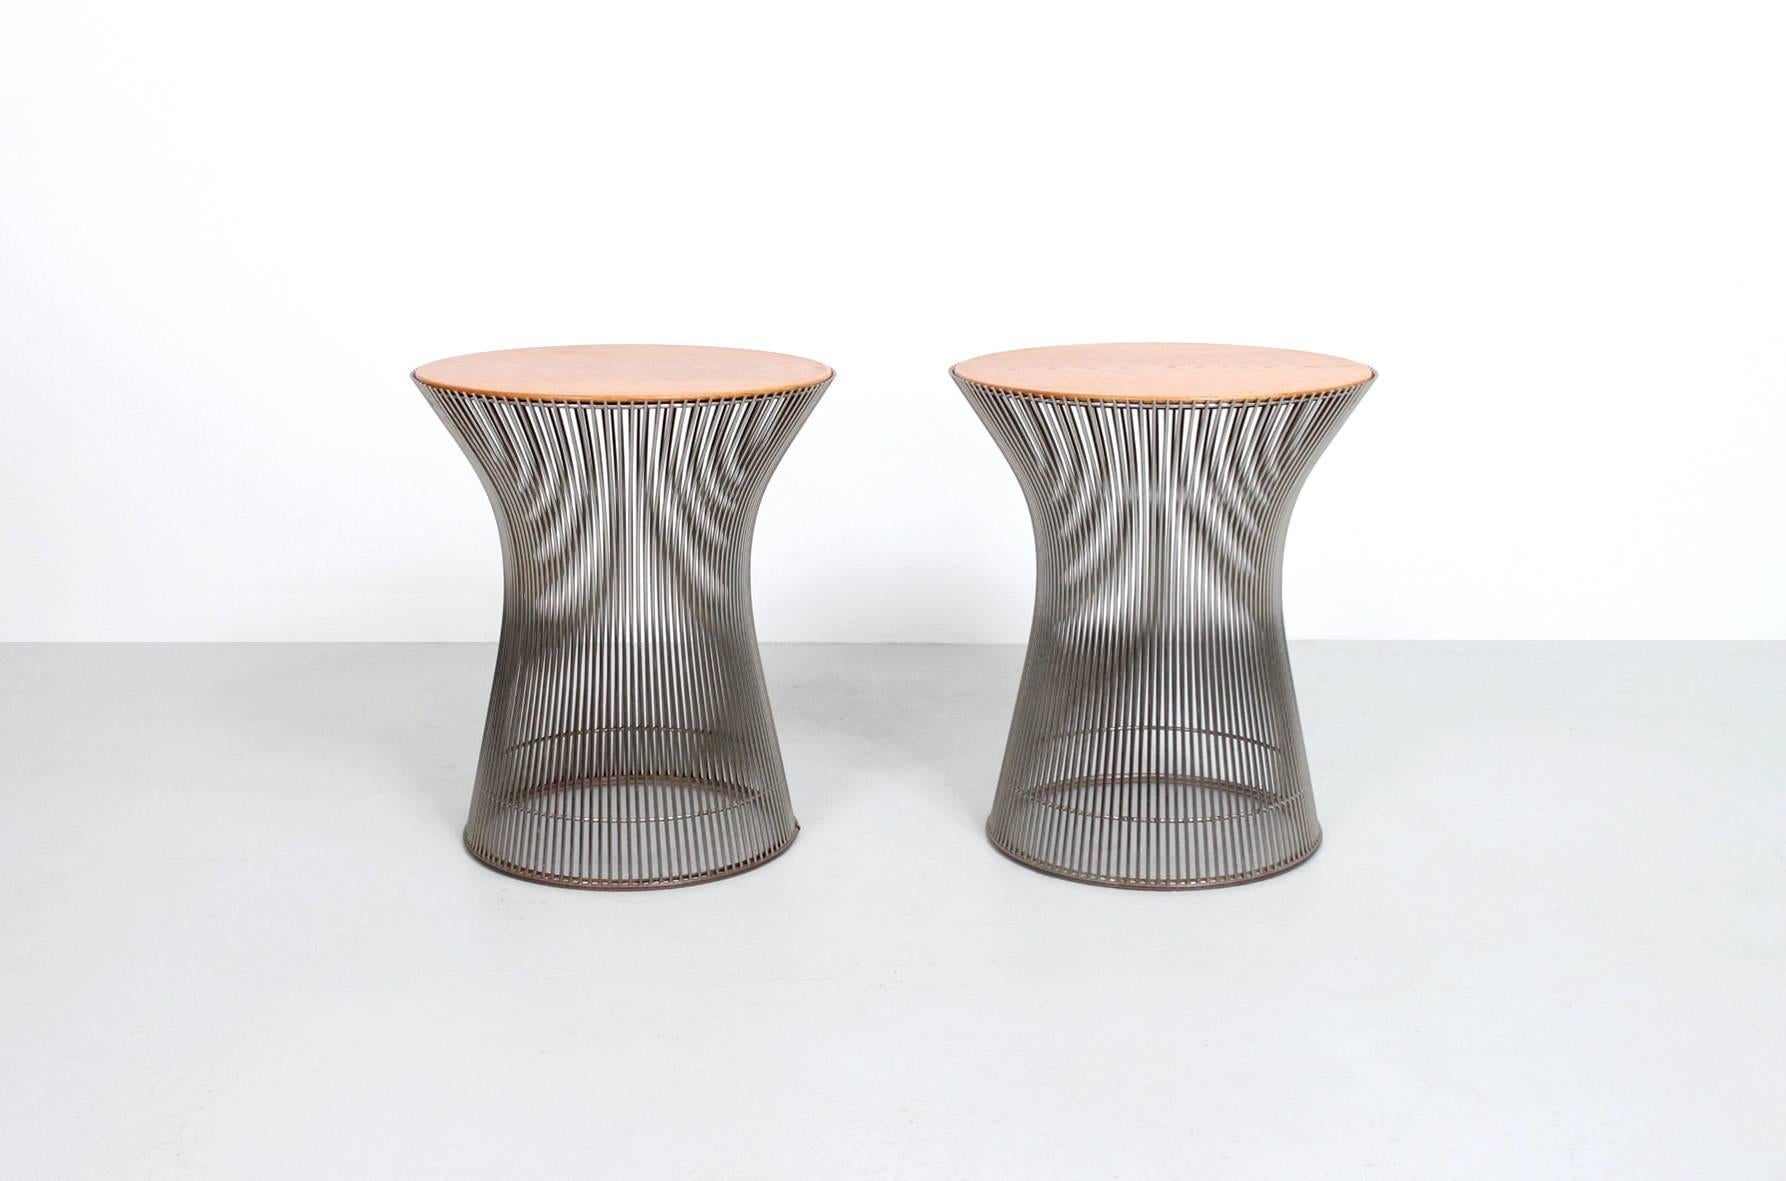 Iconic pair of side tables by Warren Platner for Knoll. These examples in chrome wire with oak tops.

____

We're offering our customers free domestic shipping on all items during the current health crisis. We will also offer free or deeply